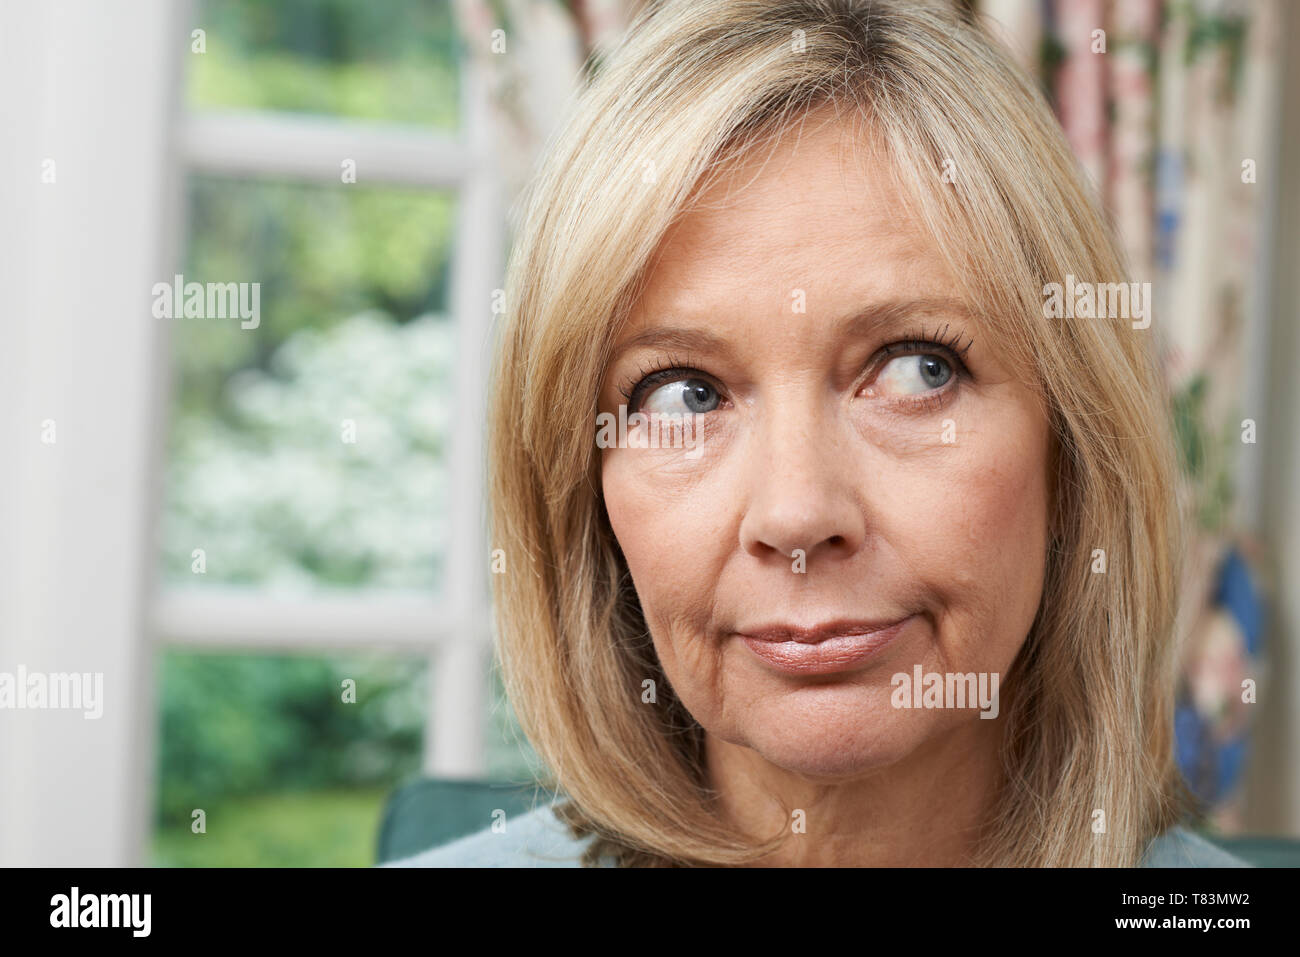 Head And Shoulders Shot Of Thoughtful Mature Woman At Home Stock Photo